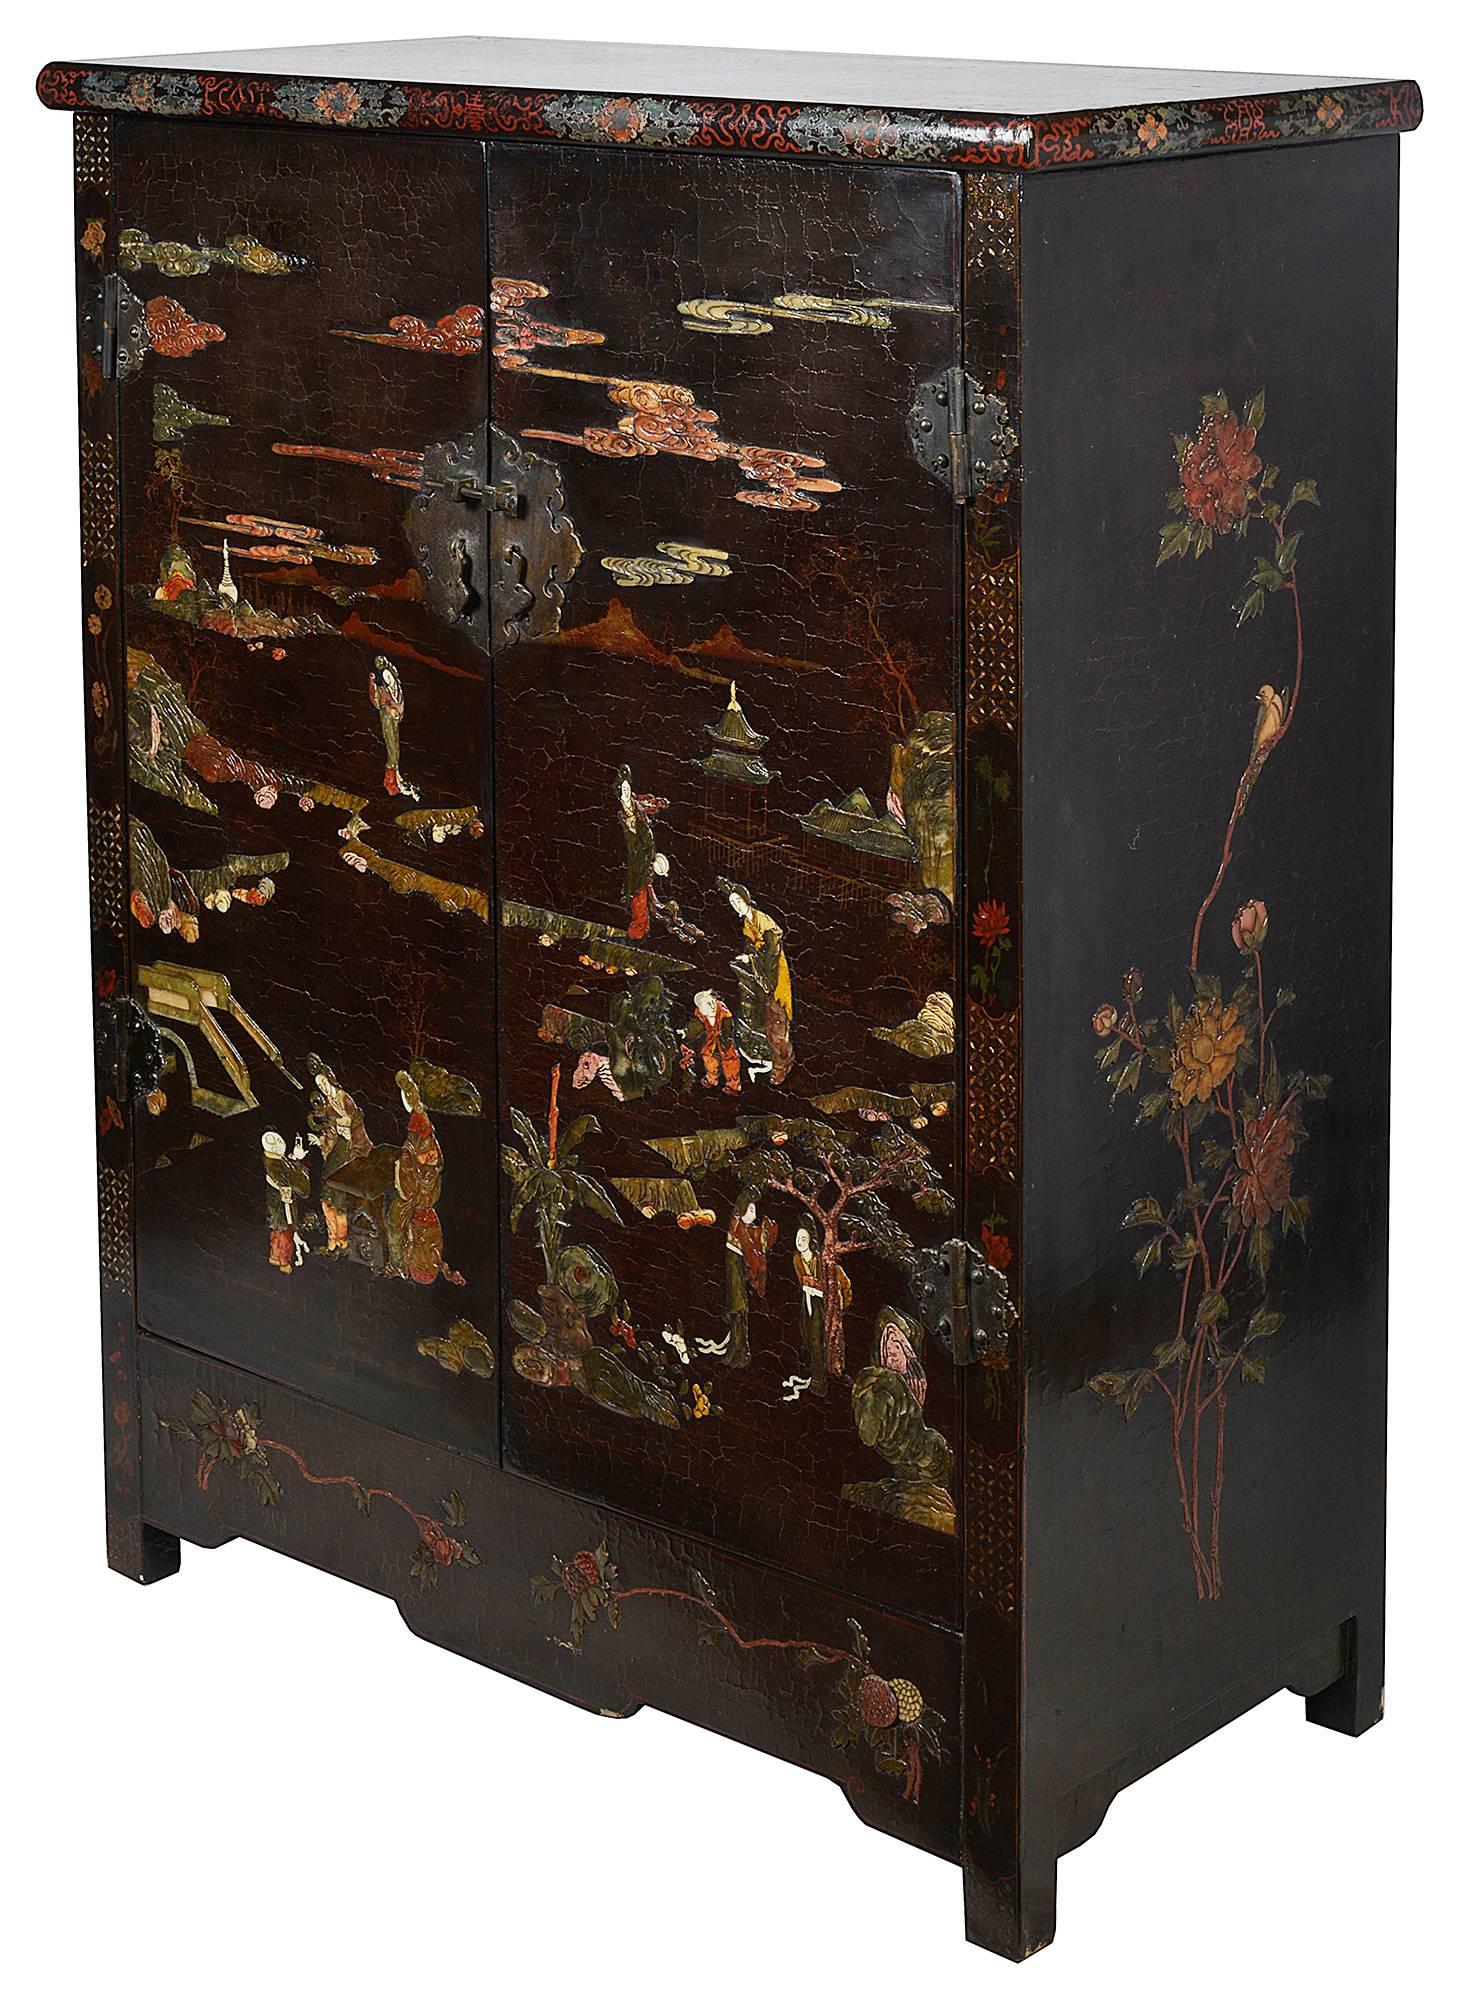 A rare pair of early 19th century Chinese Coromandel lacquer side cabinets, each inlaid with soap stone, depicting classical Chinese scenes set on a lacquer background.
Early labels showing they were exhibited at the Brighton Pavilion.